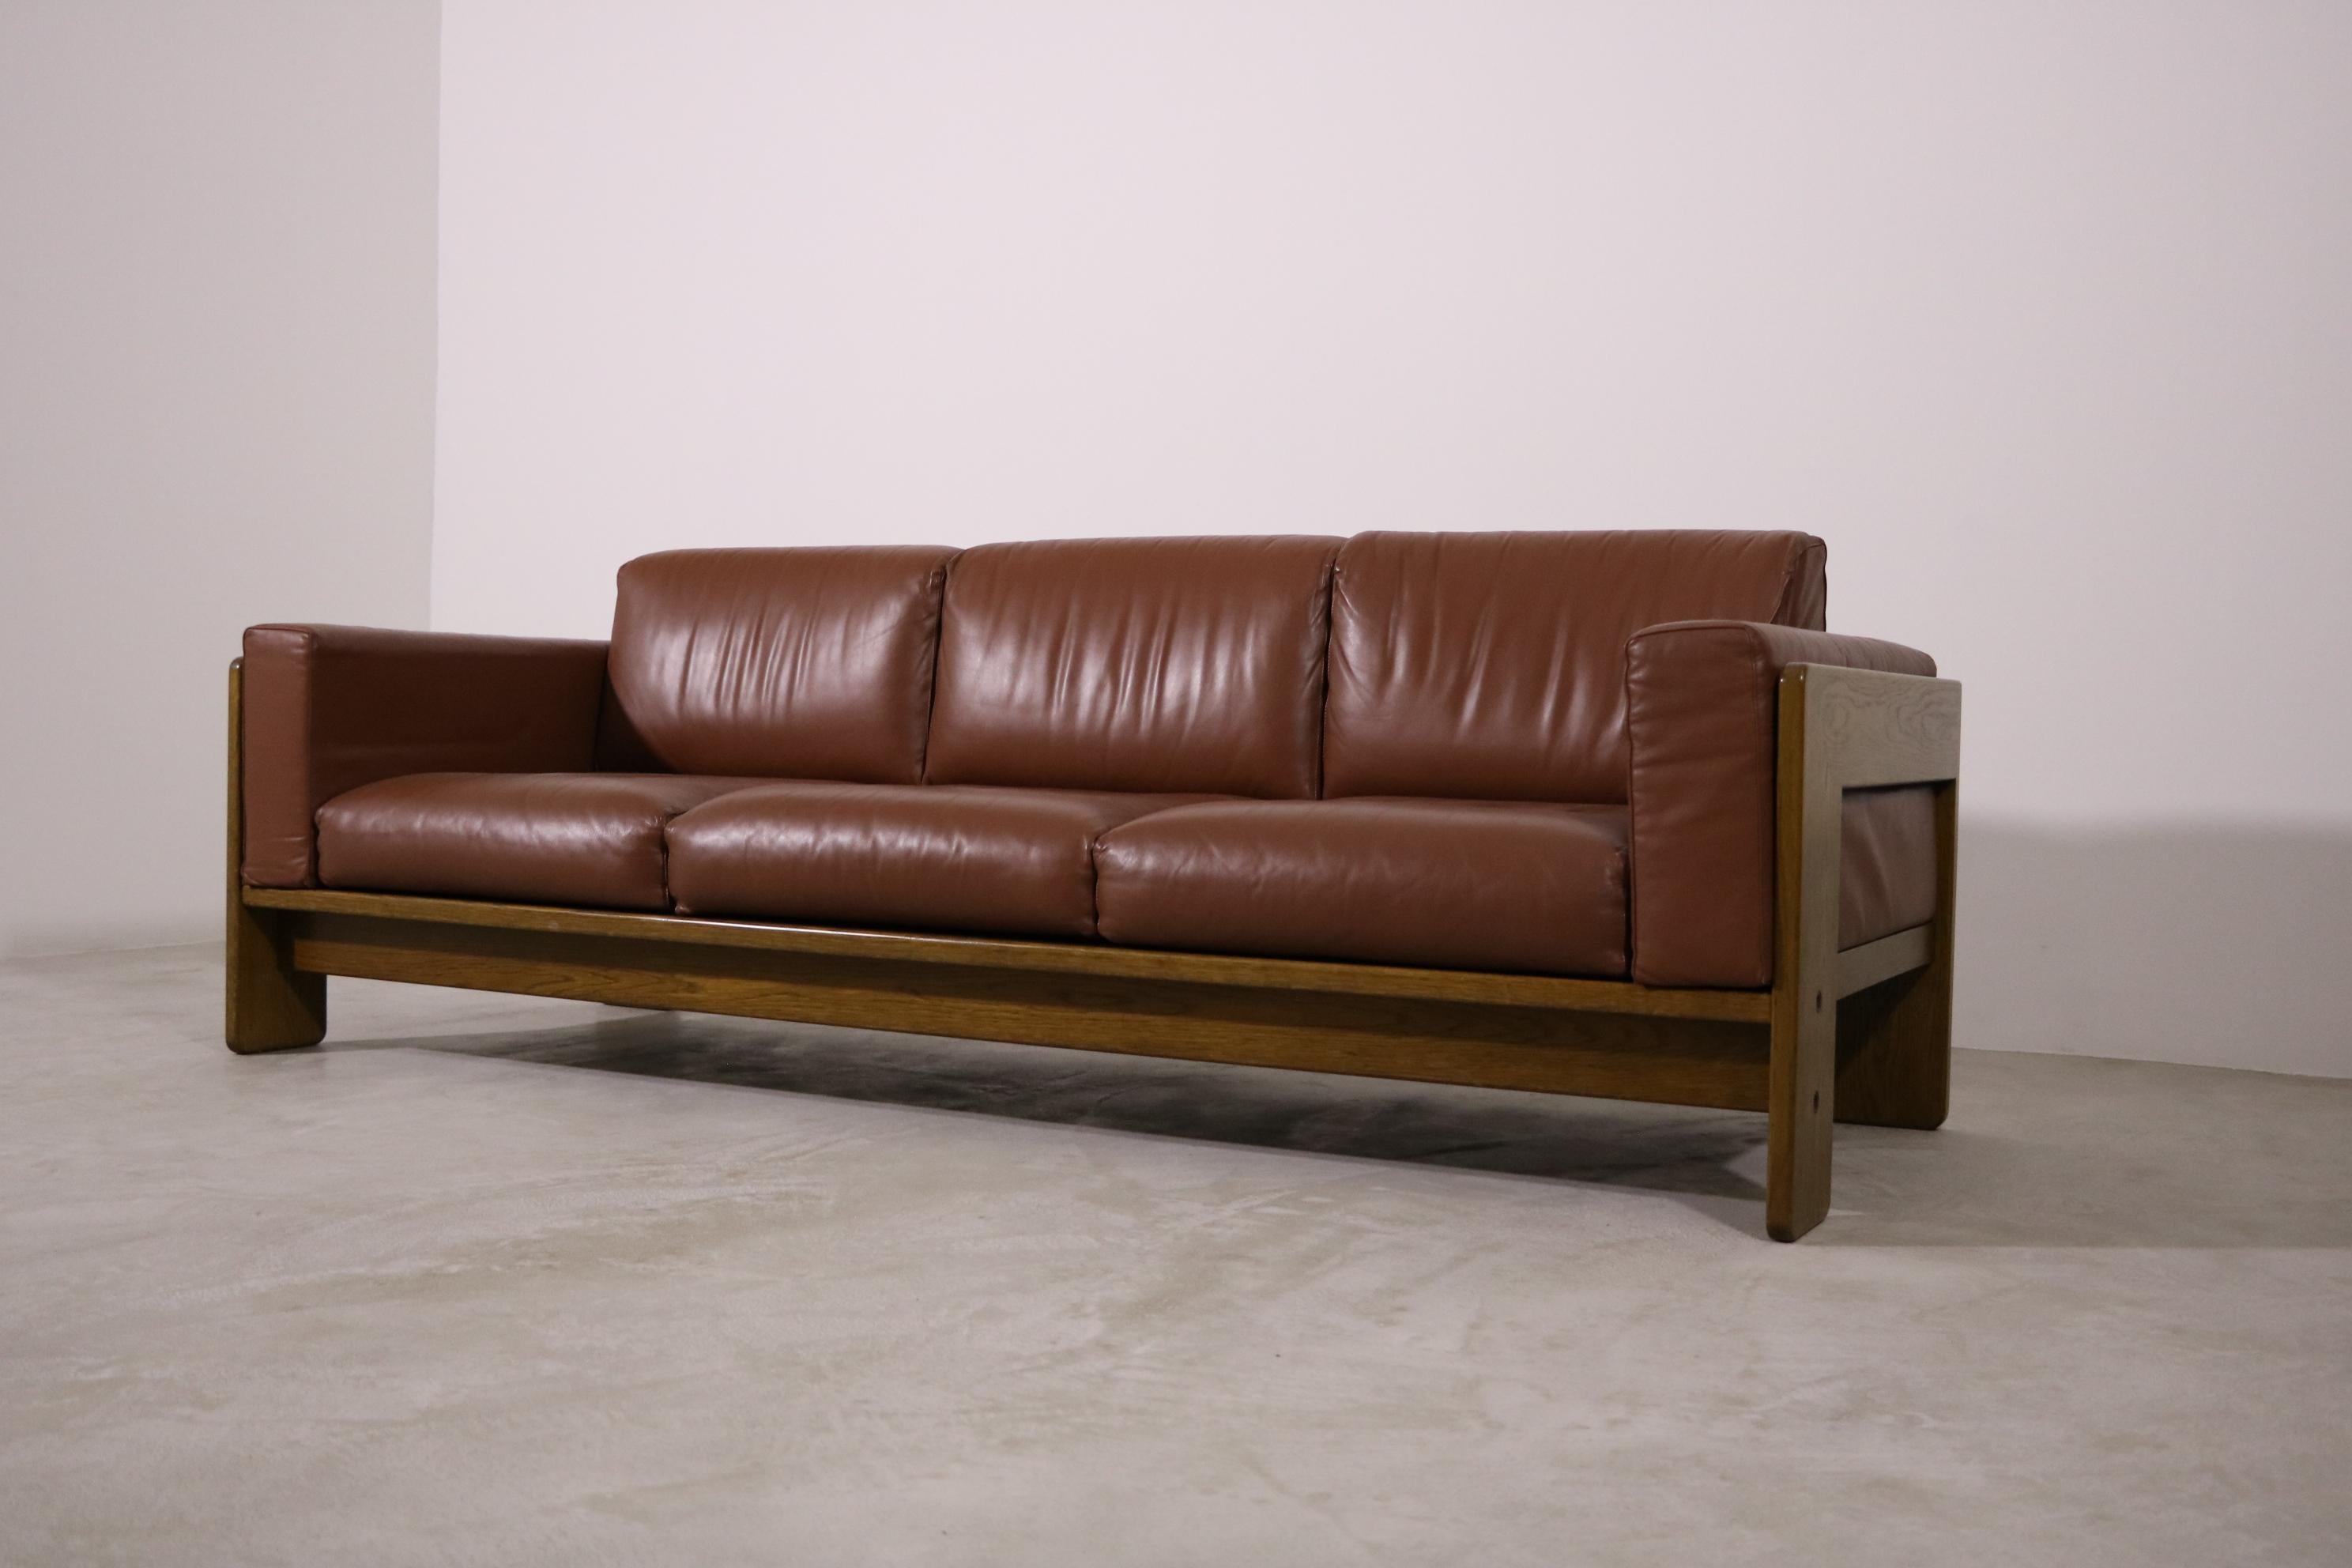 Knoll International 3-seater sofa model 'Bastiano' Tobia Scarpa leather cognac

A classic and chic three-seater sofa from the Bastiano series, designed by the iconic Italian designer duo Afra & Tobia Scarpa for Knoll, Italy, circa 1960.

Frame wood